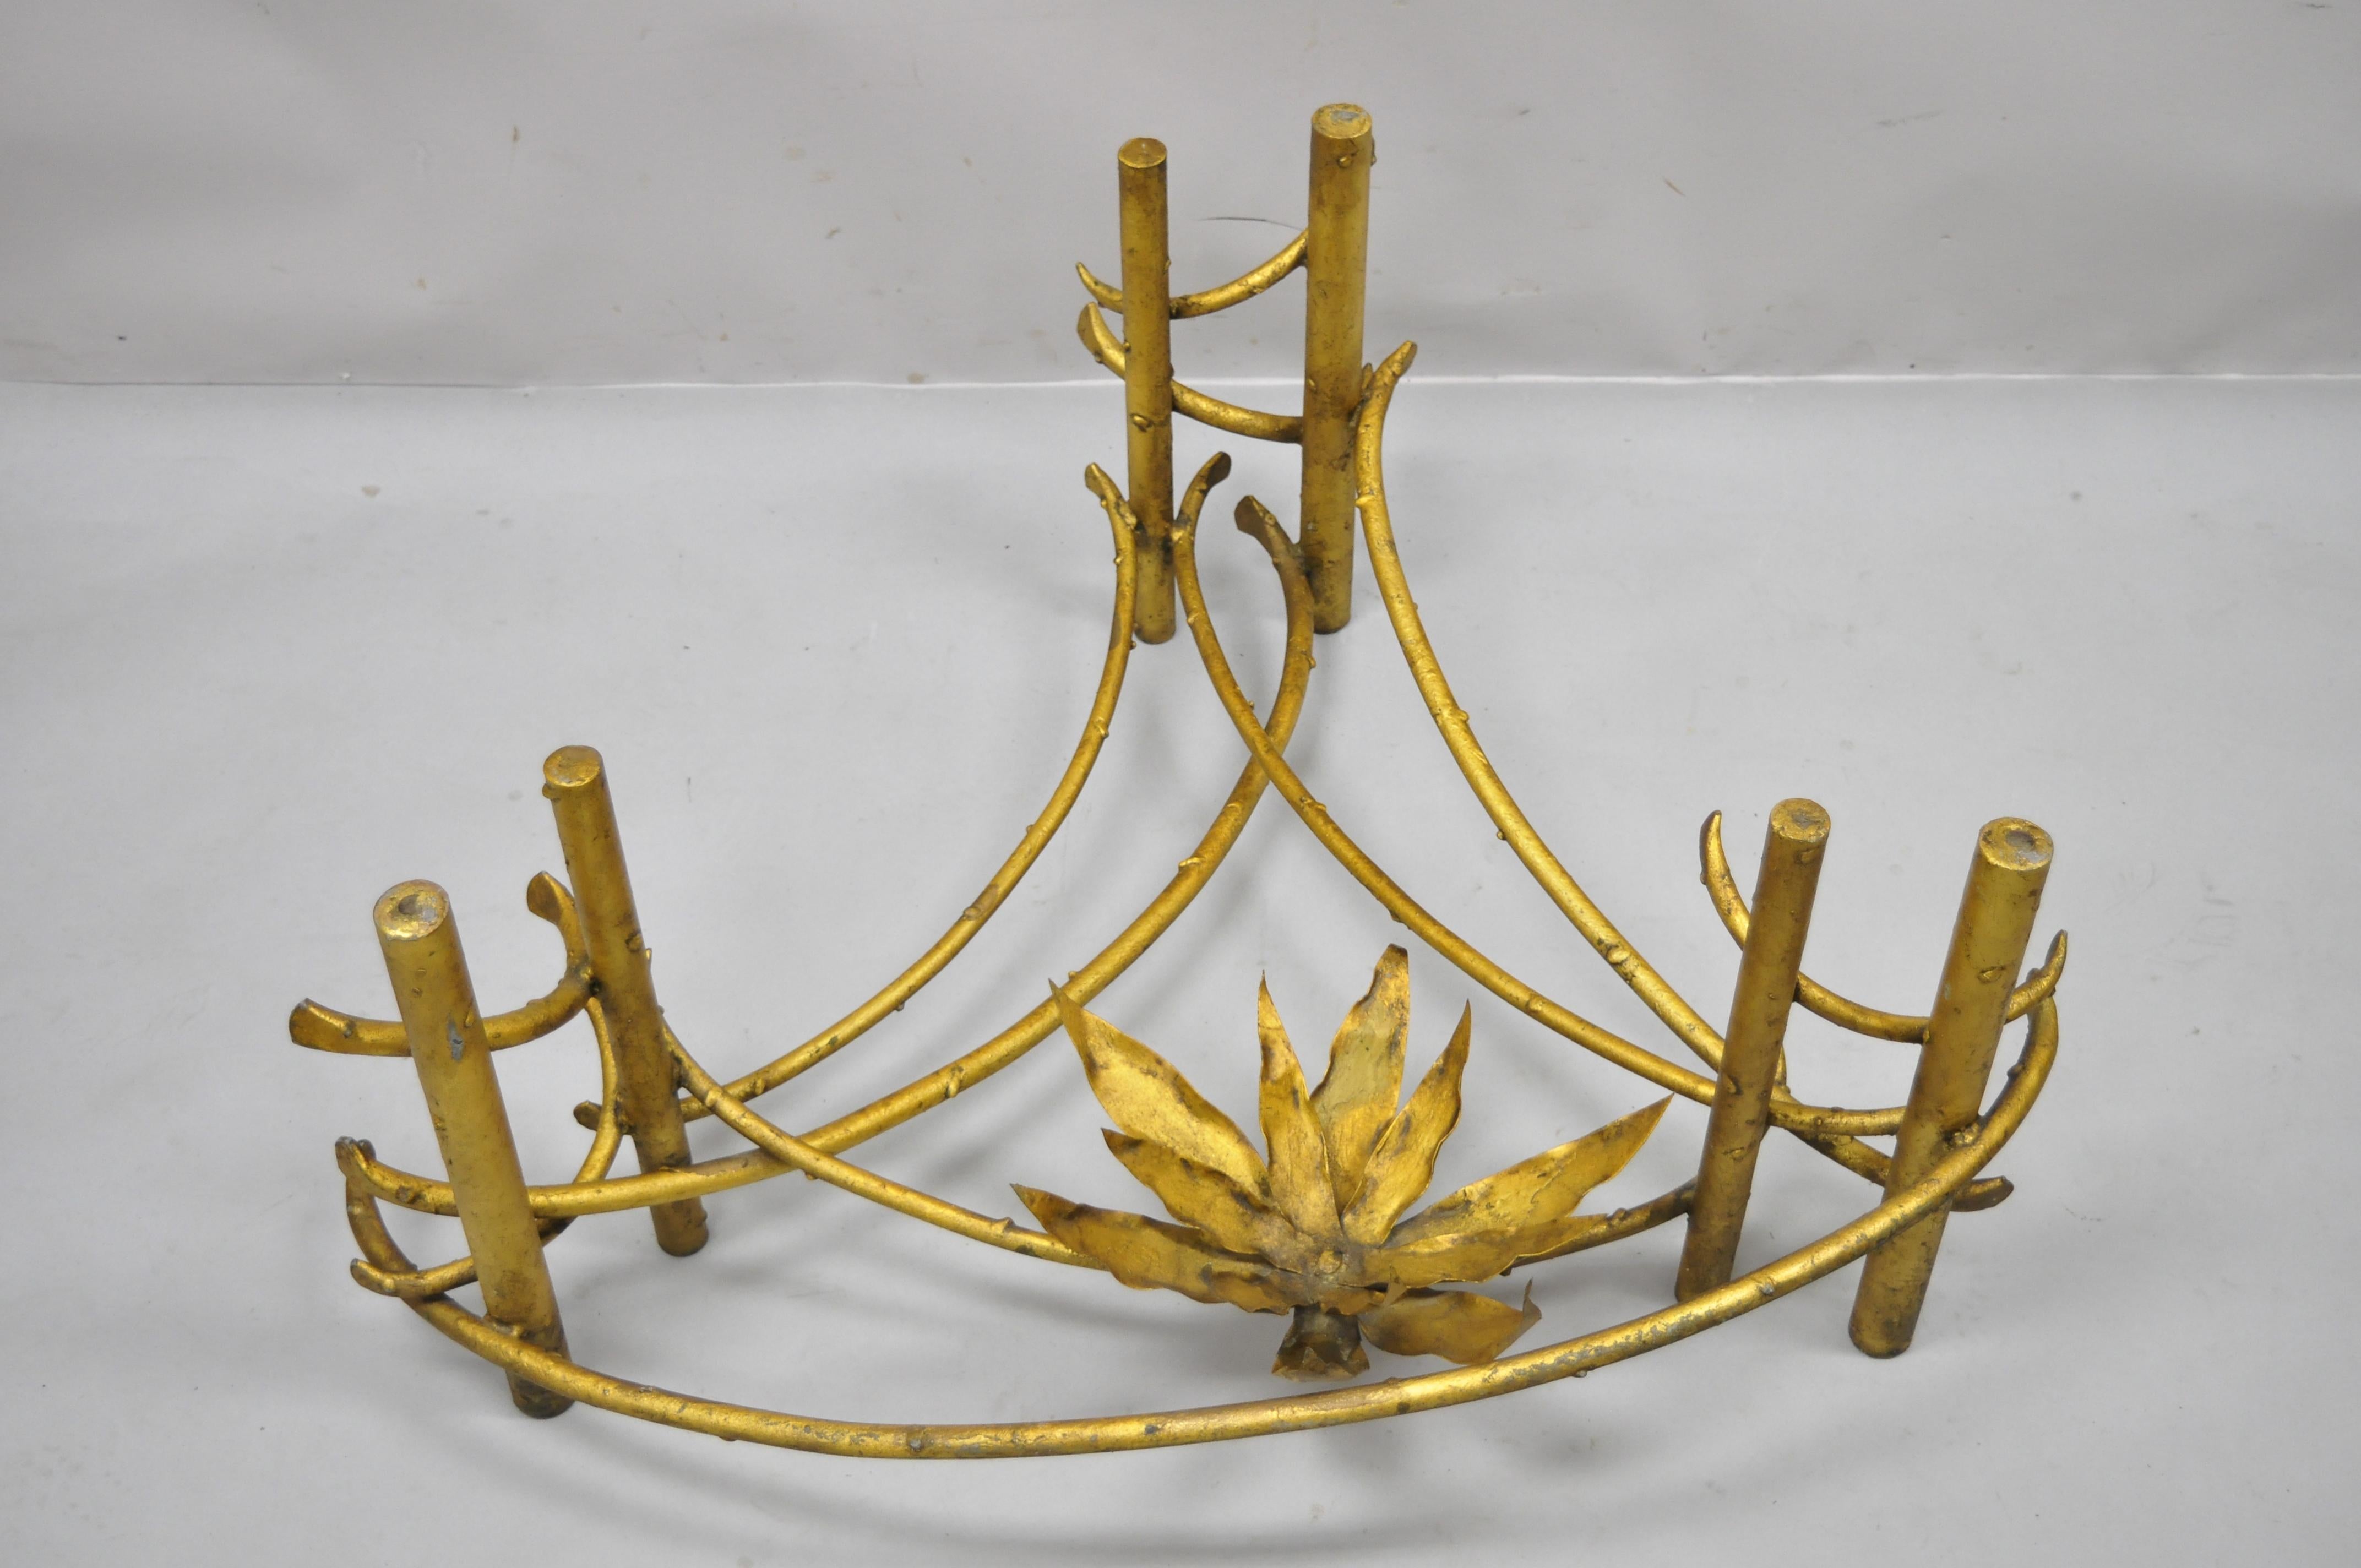 Silas Seandel lotus flower gold gilt iron brutalist coffee table base. Item features gold gilt finish, lotus flower design, faux bois branch base, iron construction, very nice vintage item, great style and form. Age: Mid 20th century. Measurements: